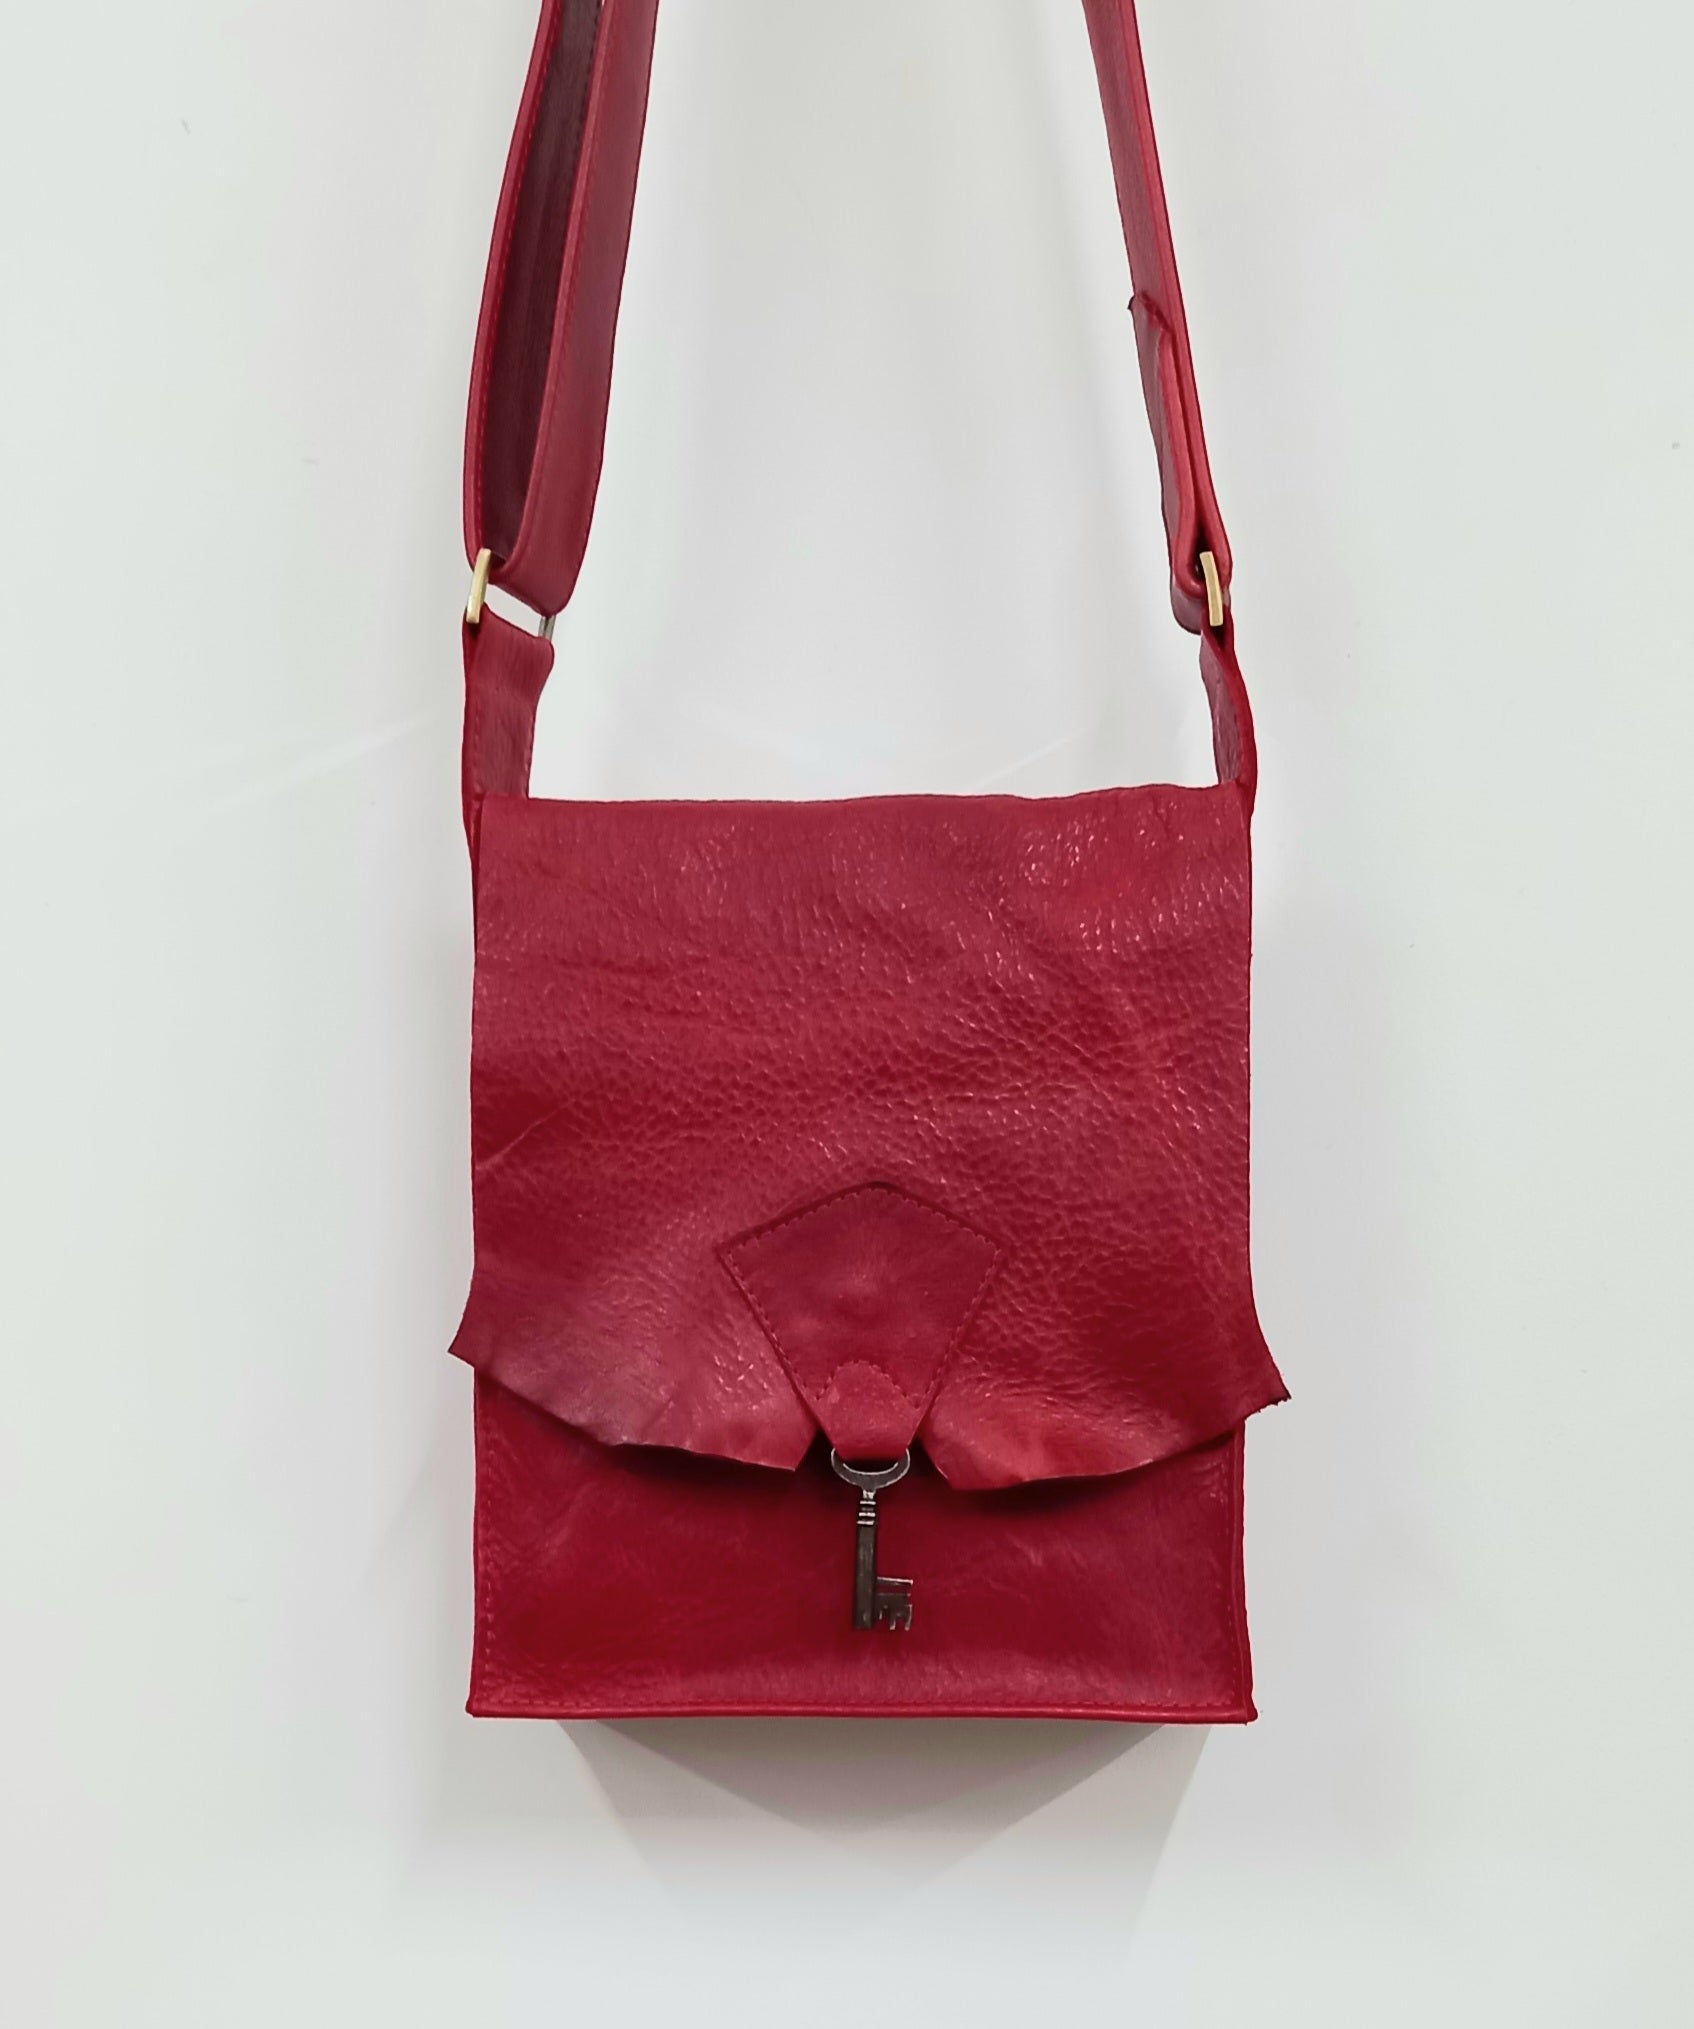 Raw Edge Leather Bag with Vintage Key Detail - Flame Red